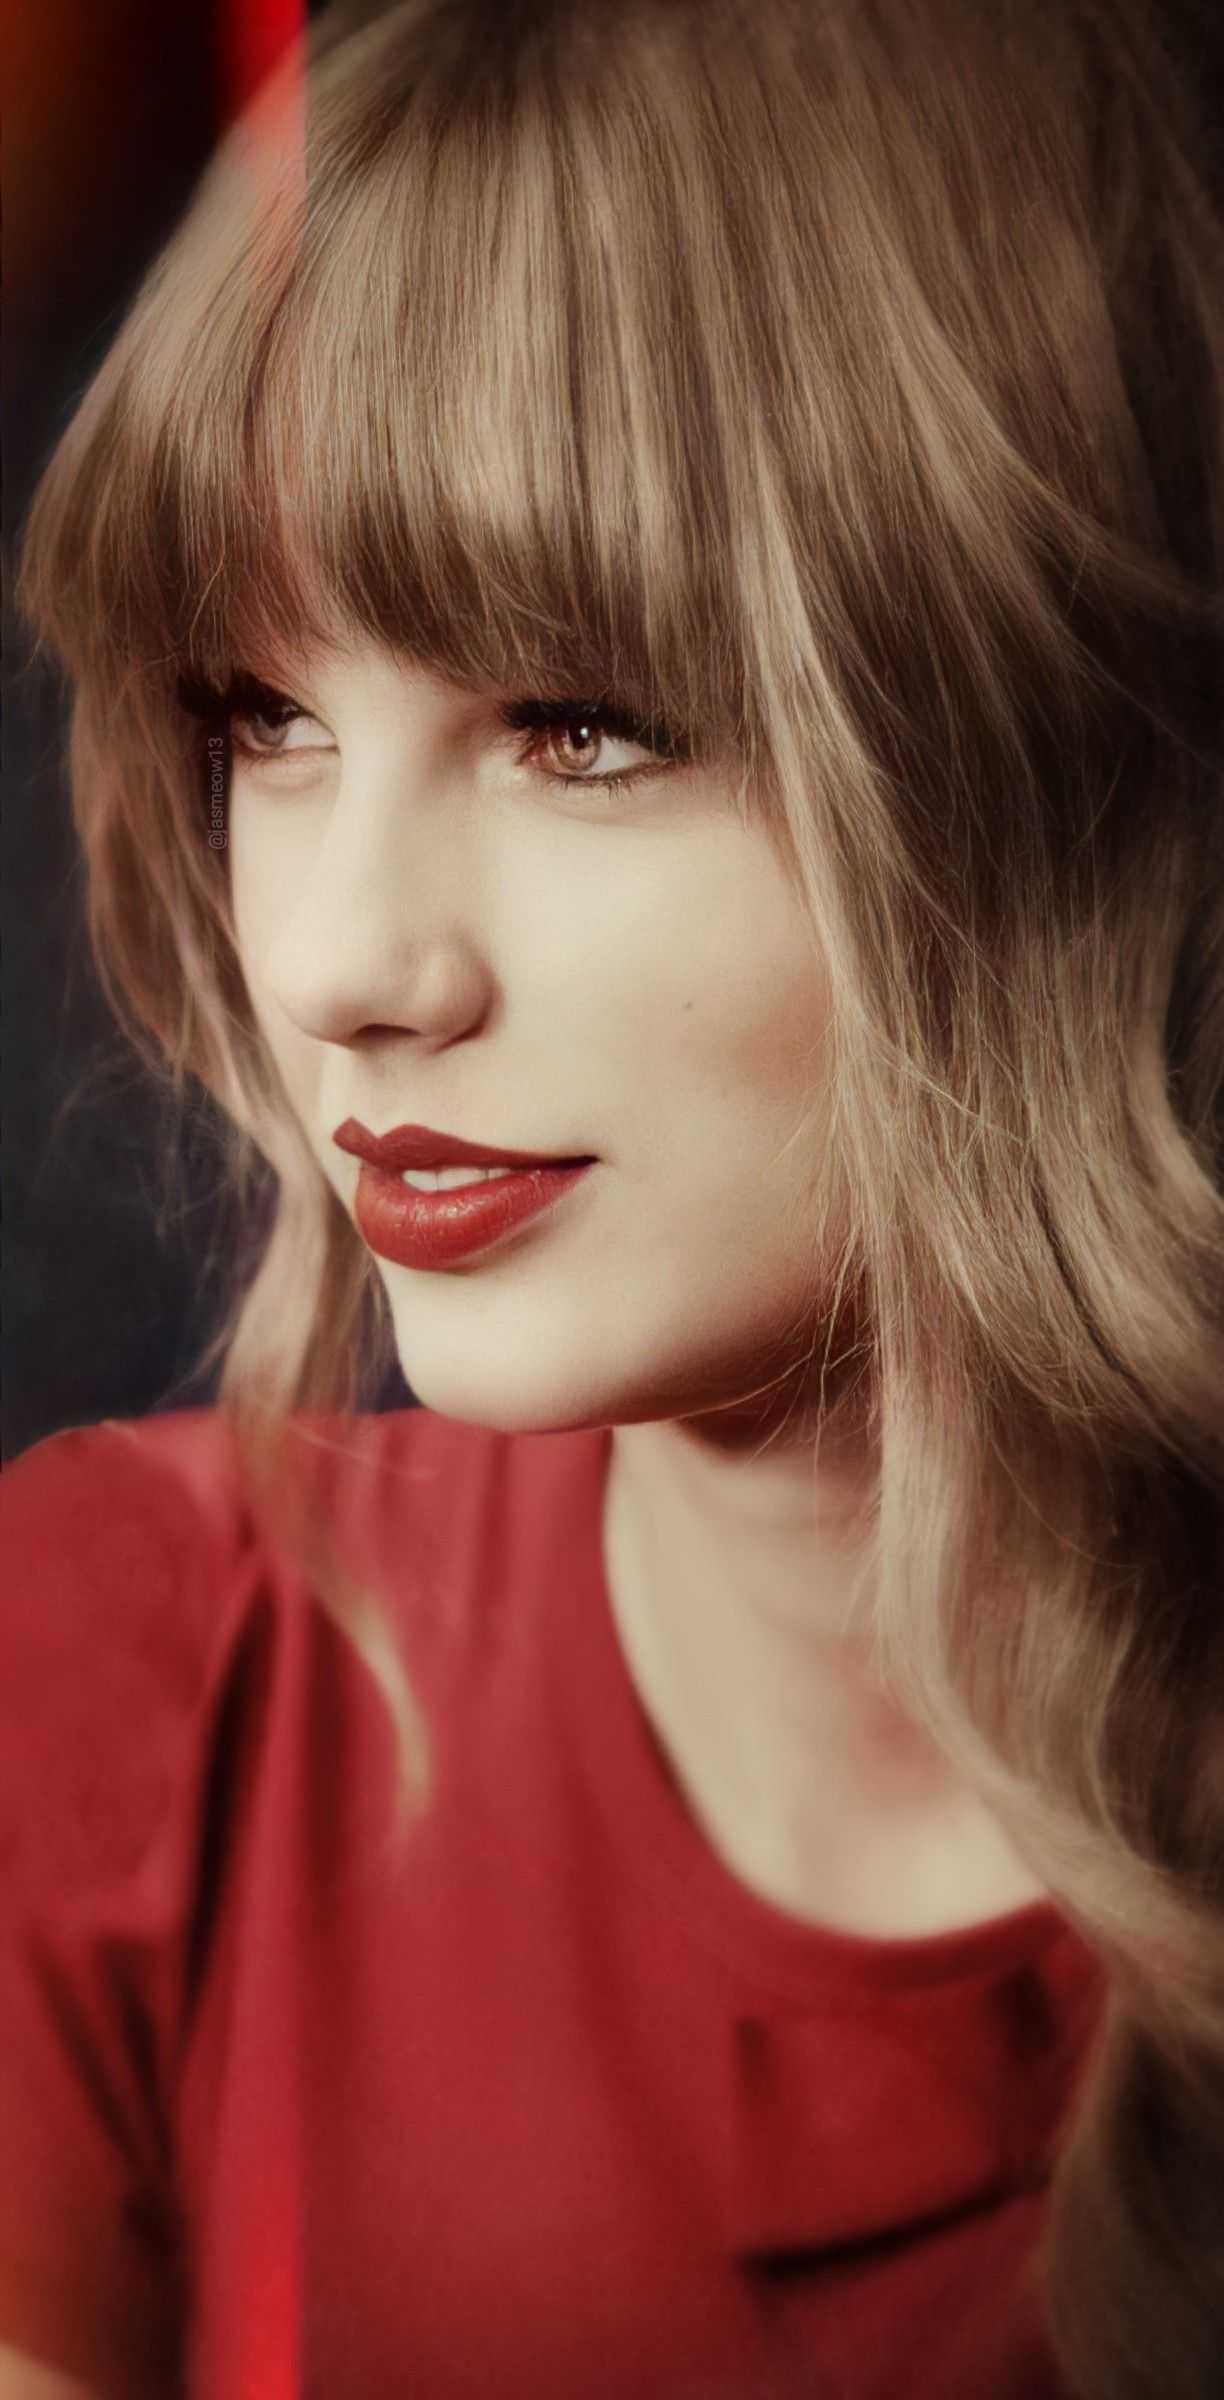 A woman in red shirt and lipstick - Taylor Swift